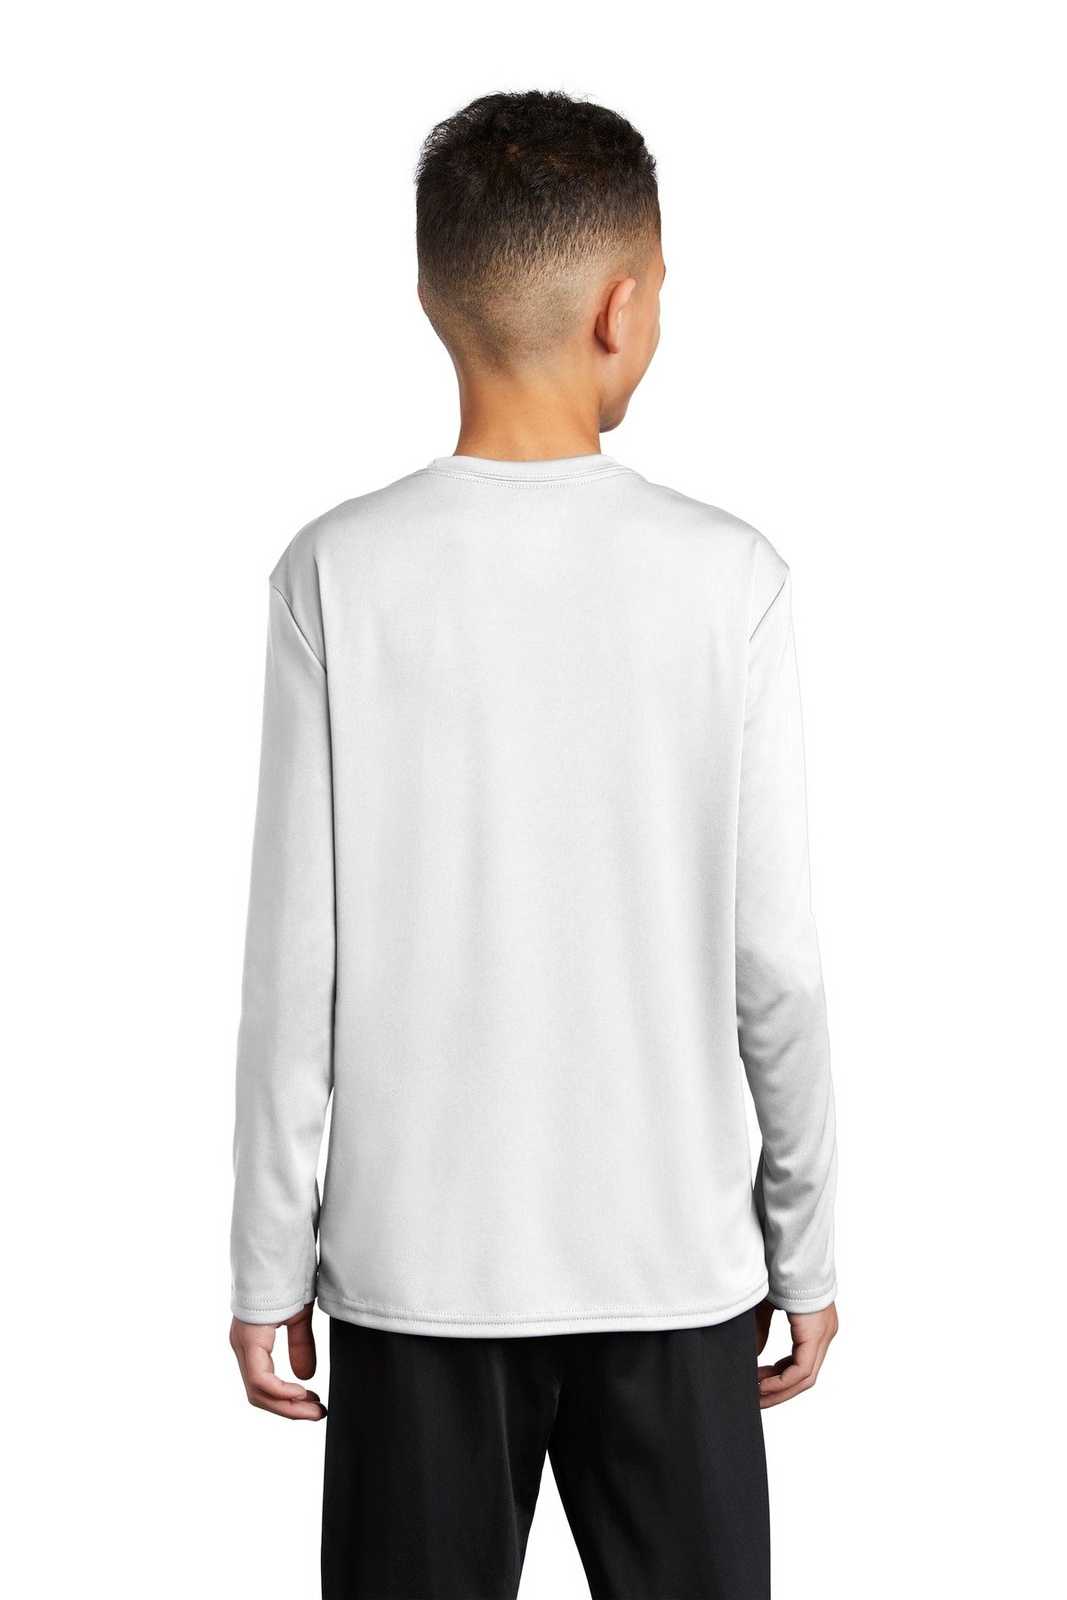 Port & Company PC380YLS Youth Long Sleeve Performance Tee - White - HIT a Double - 1